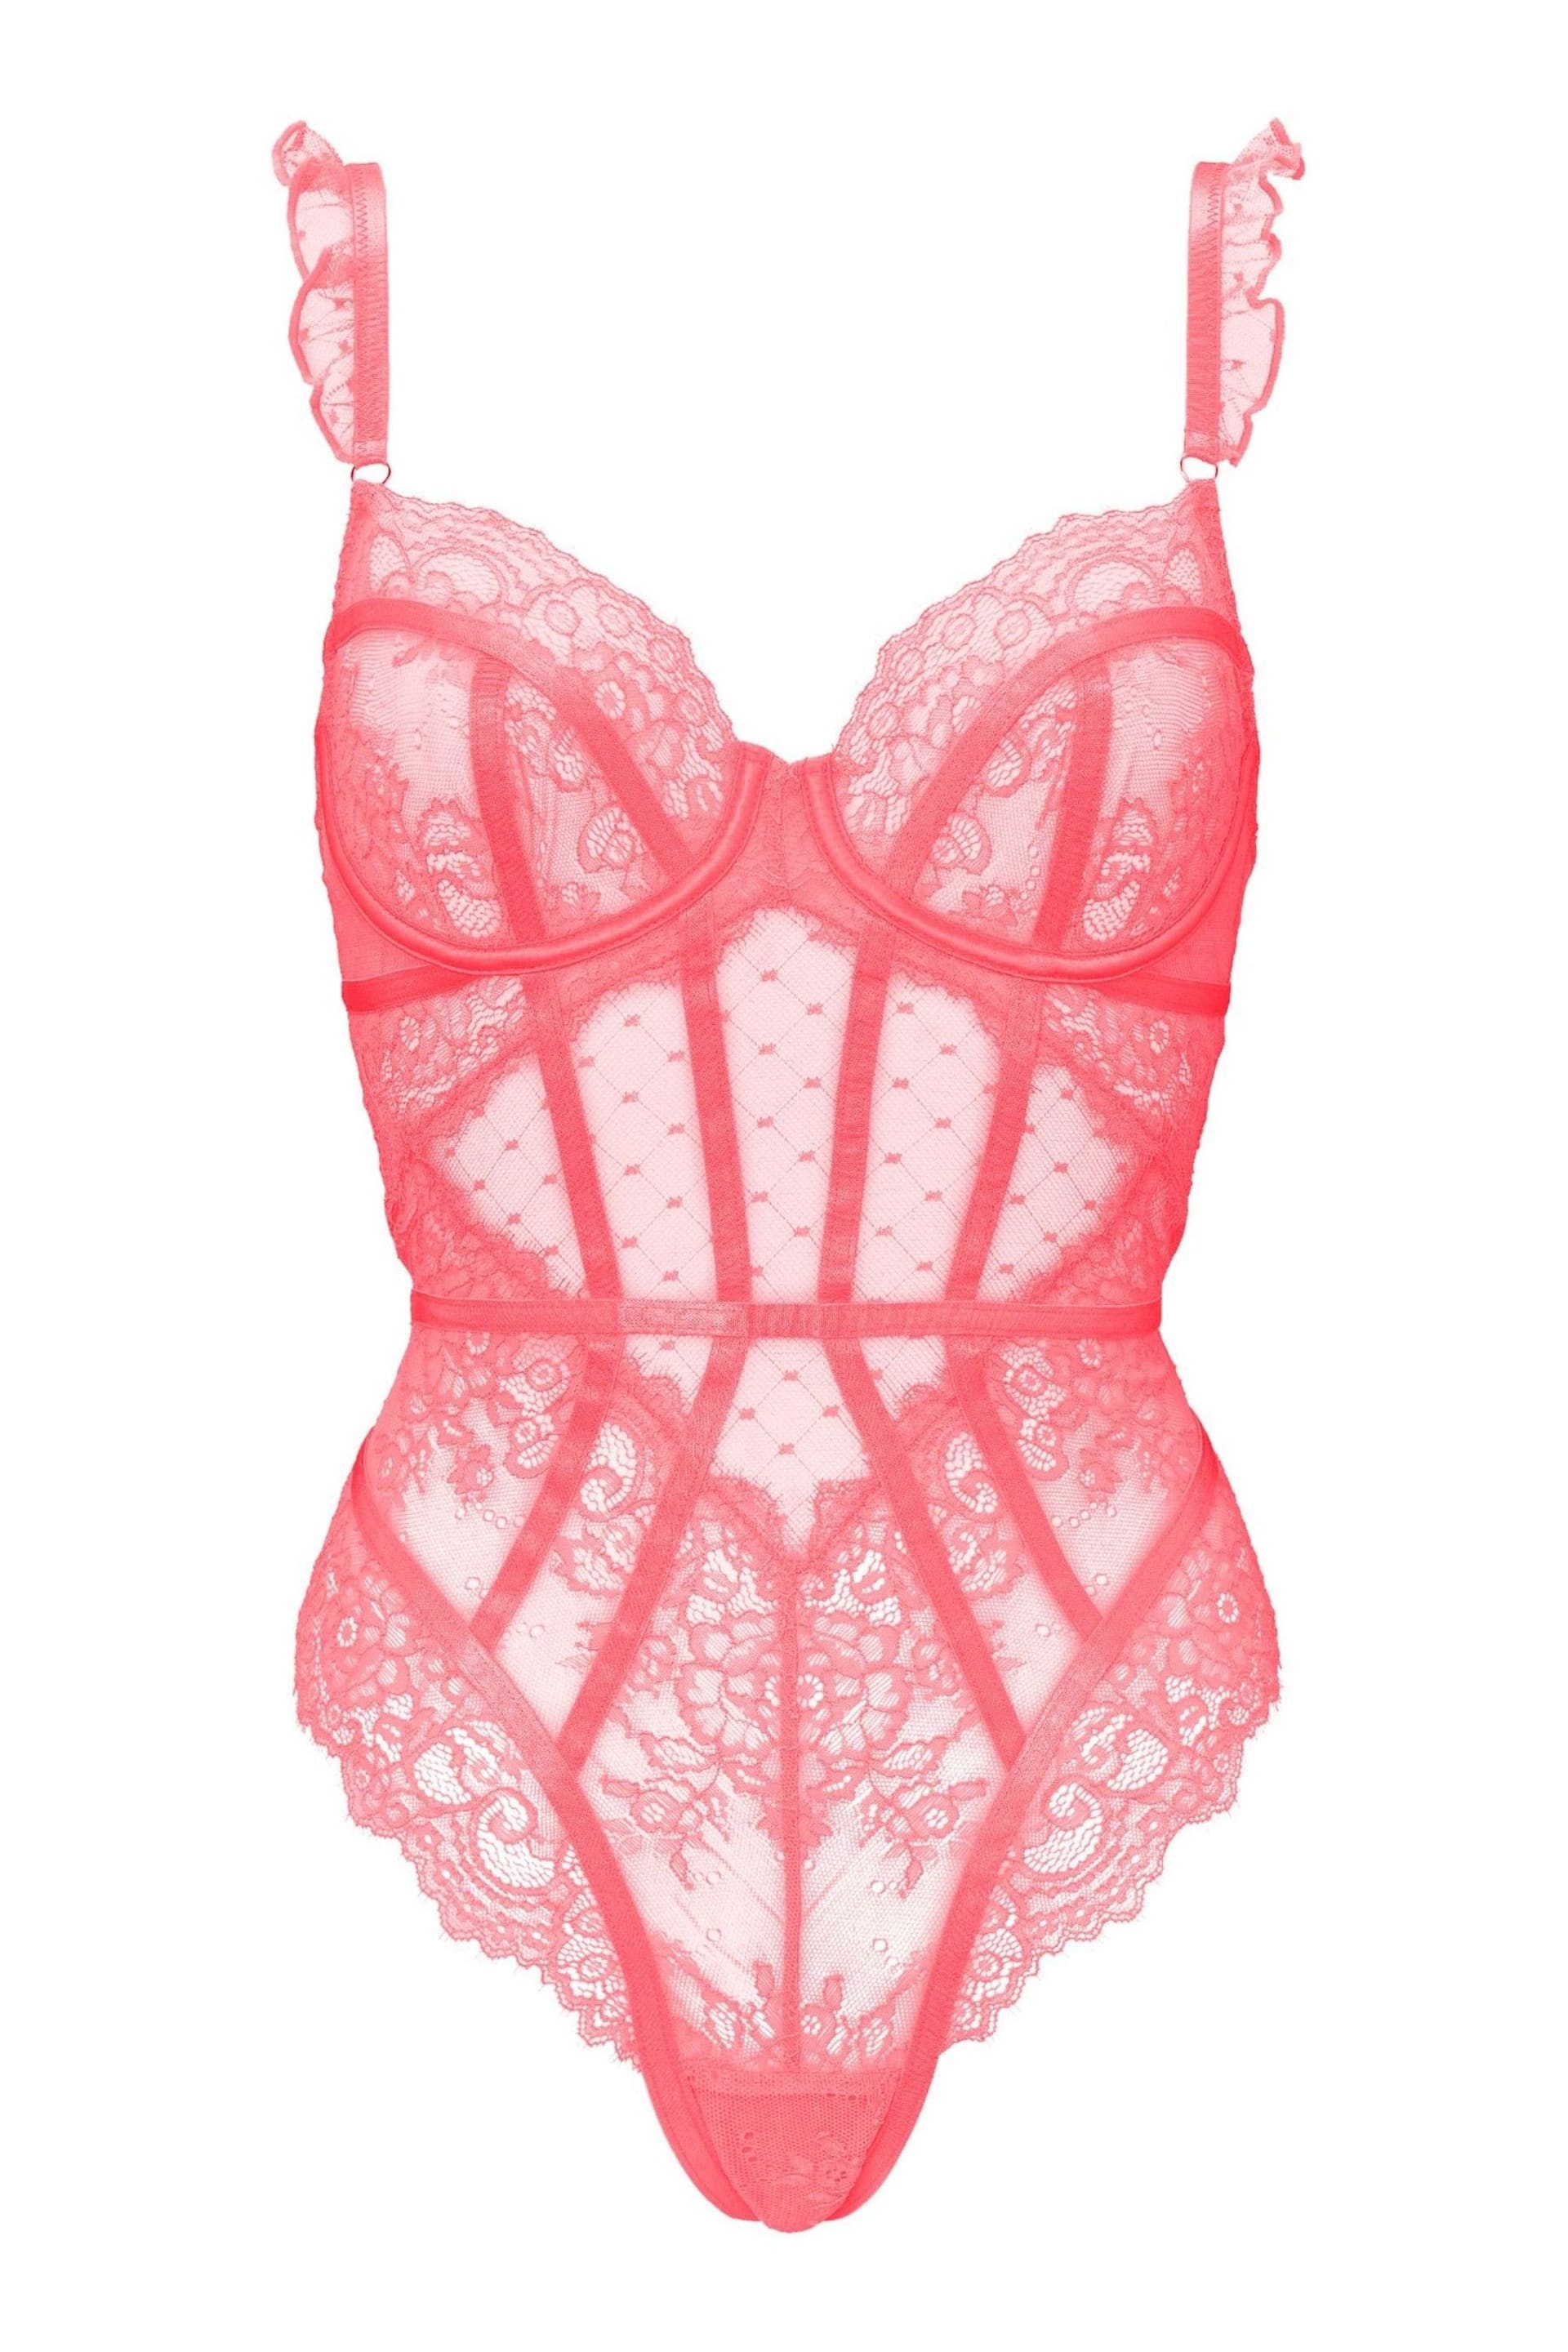 Ann Summers Pink Sweetheart Lace Body - Image 5 of 5